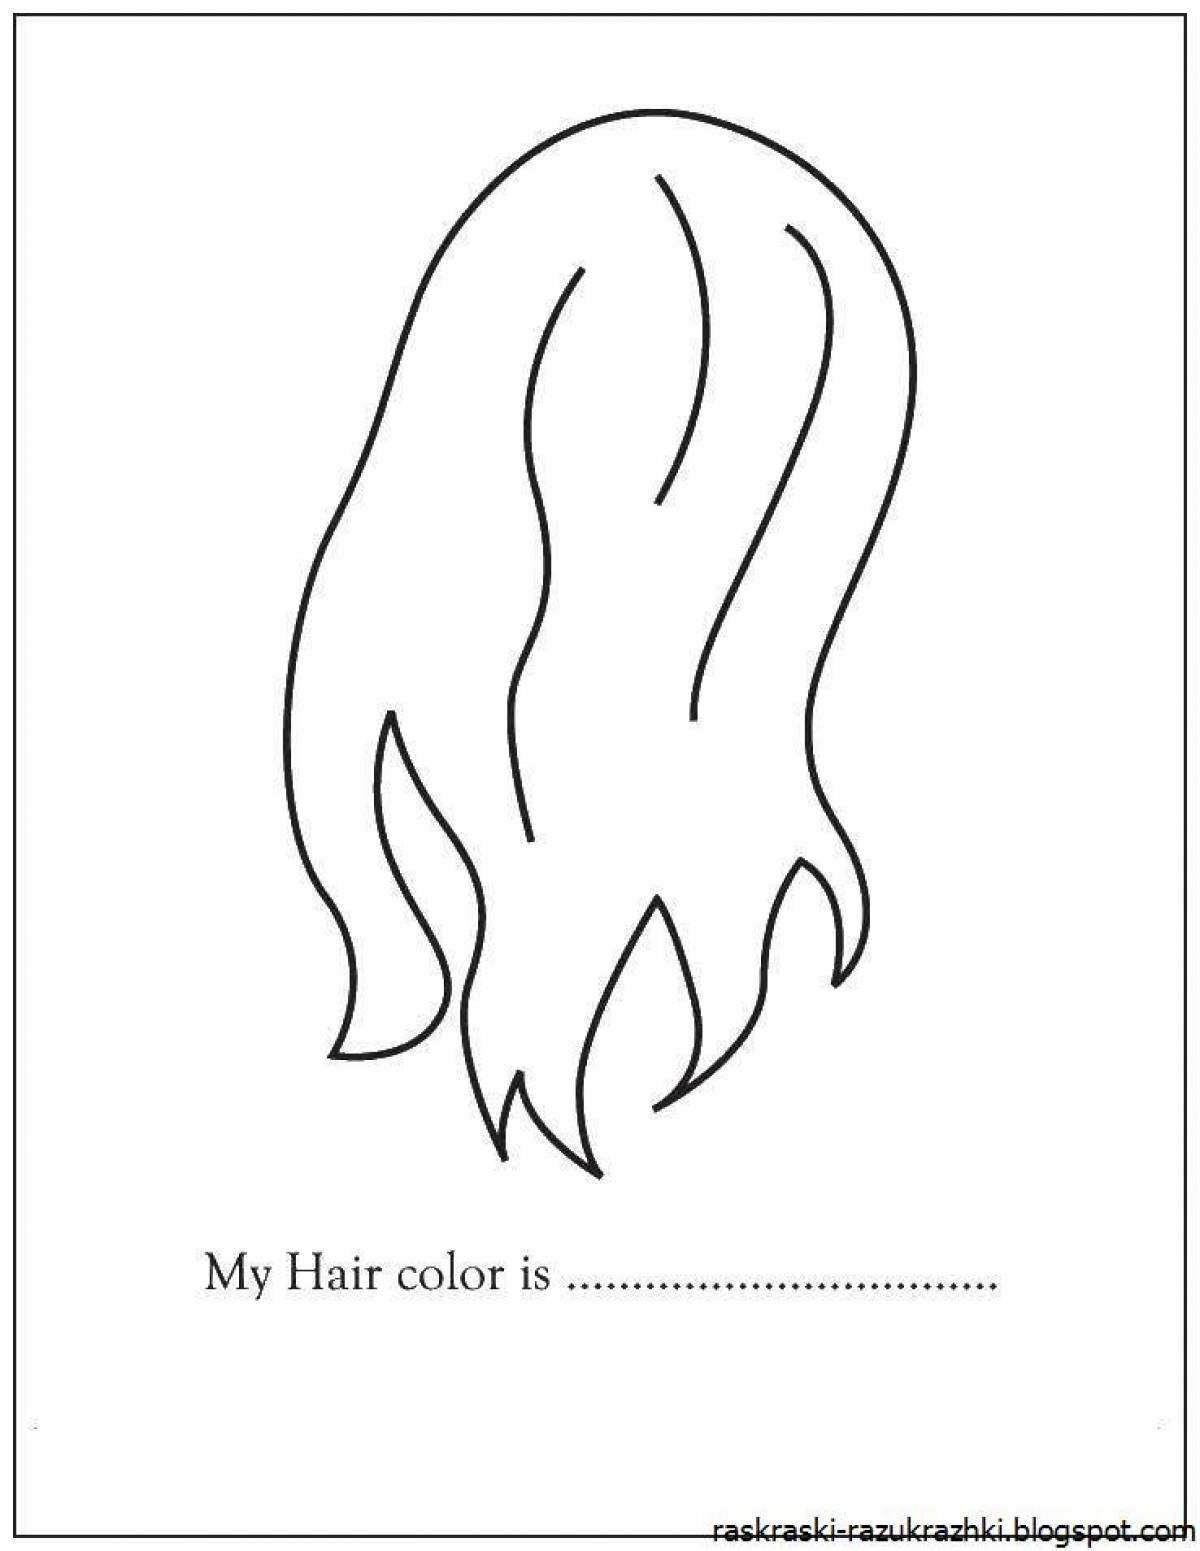 Colorful hair coloring page